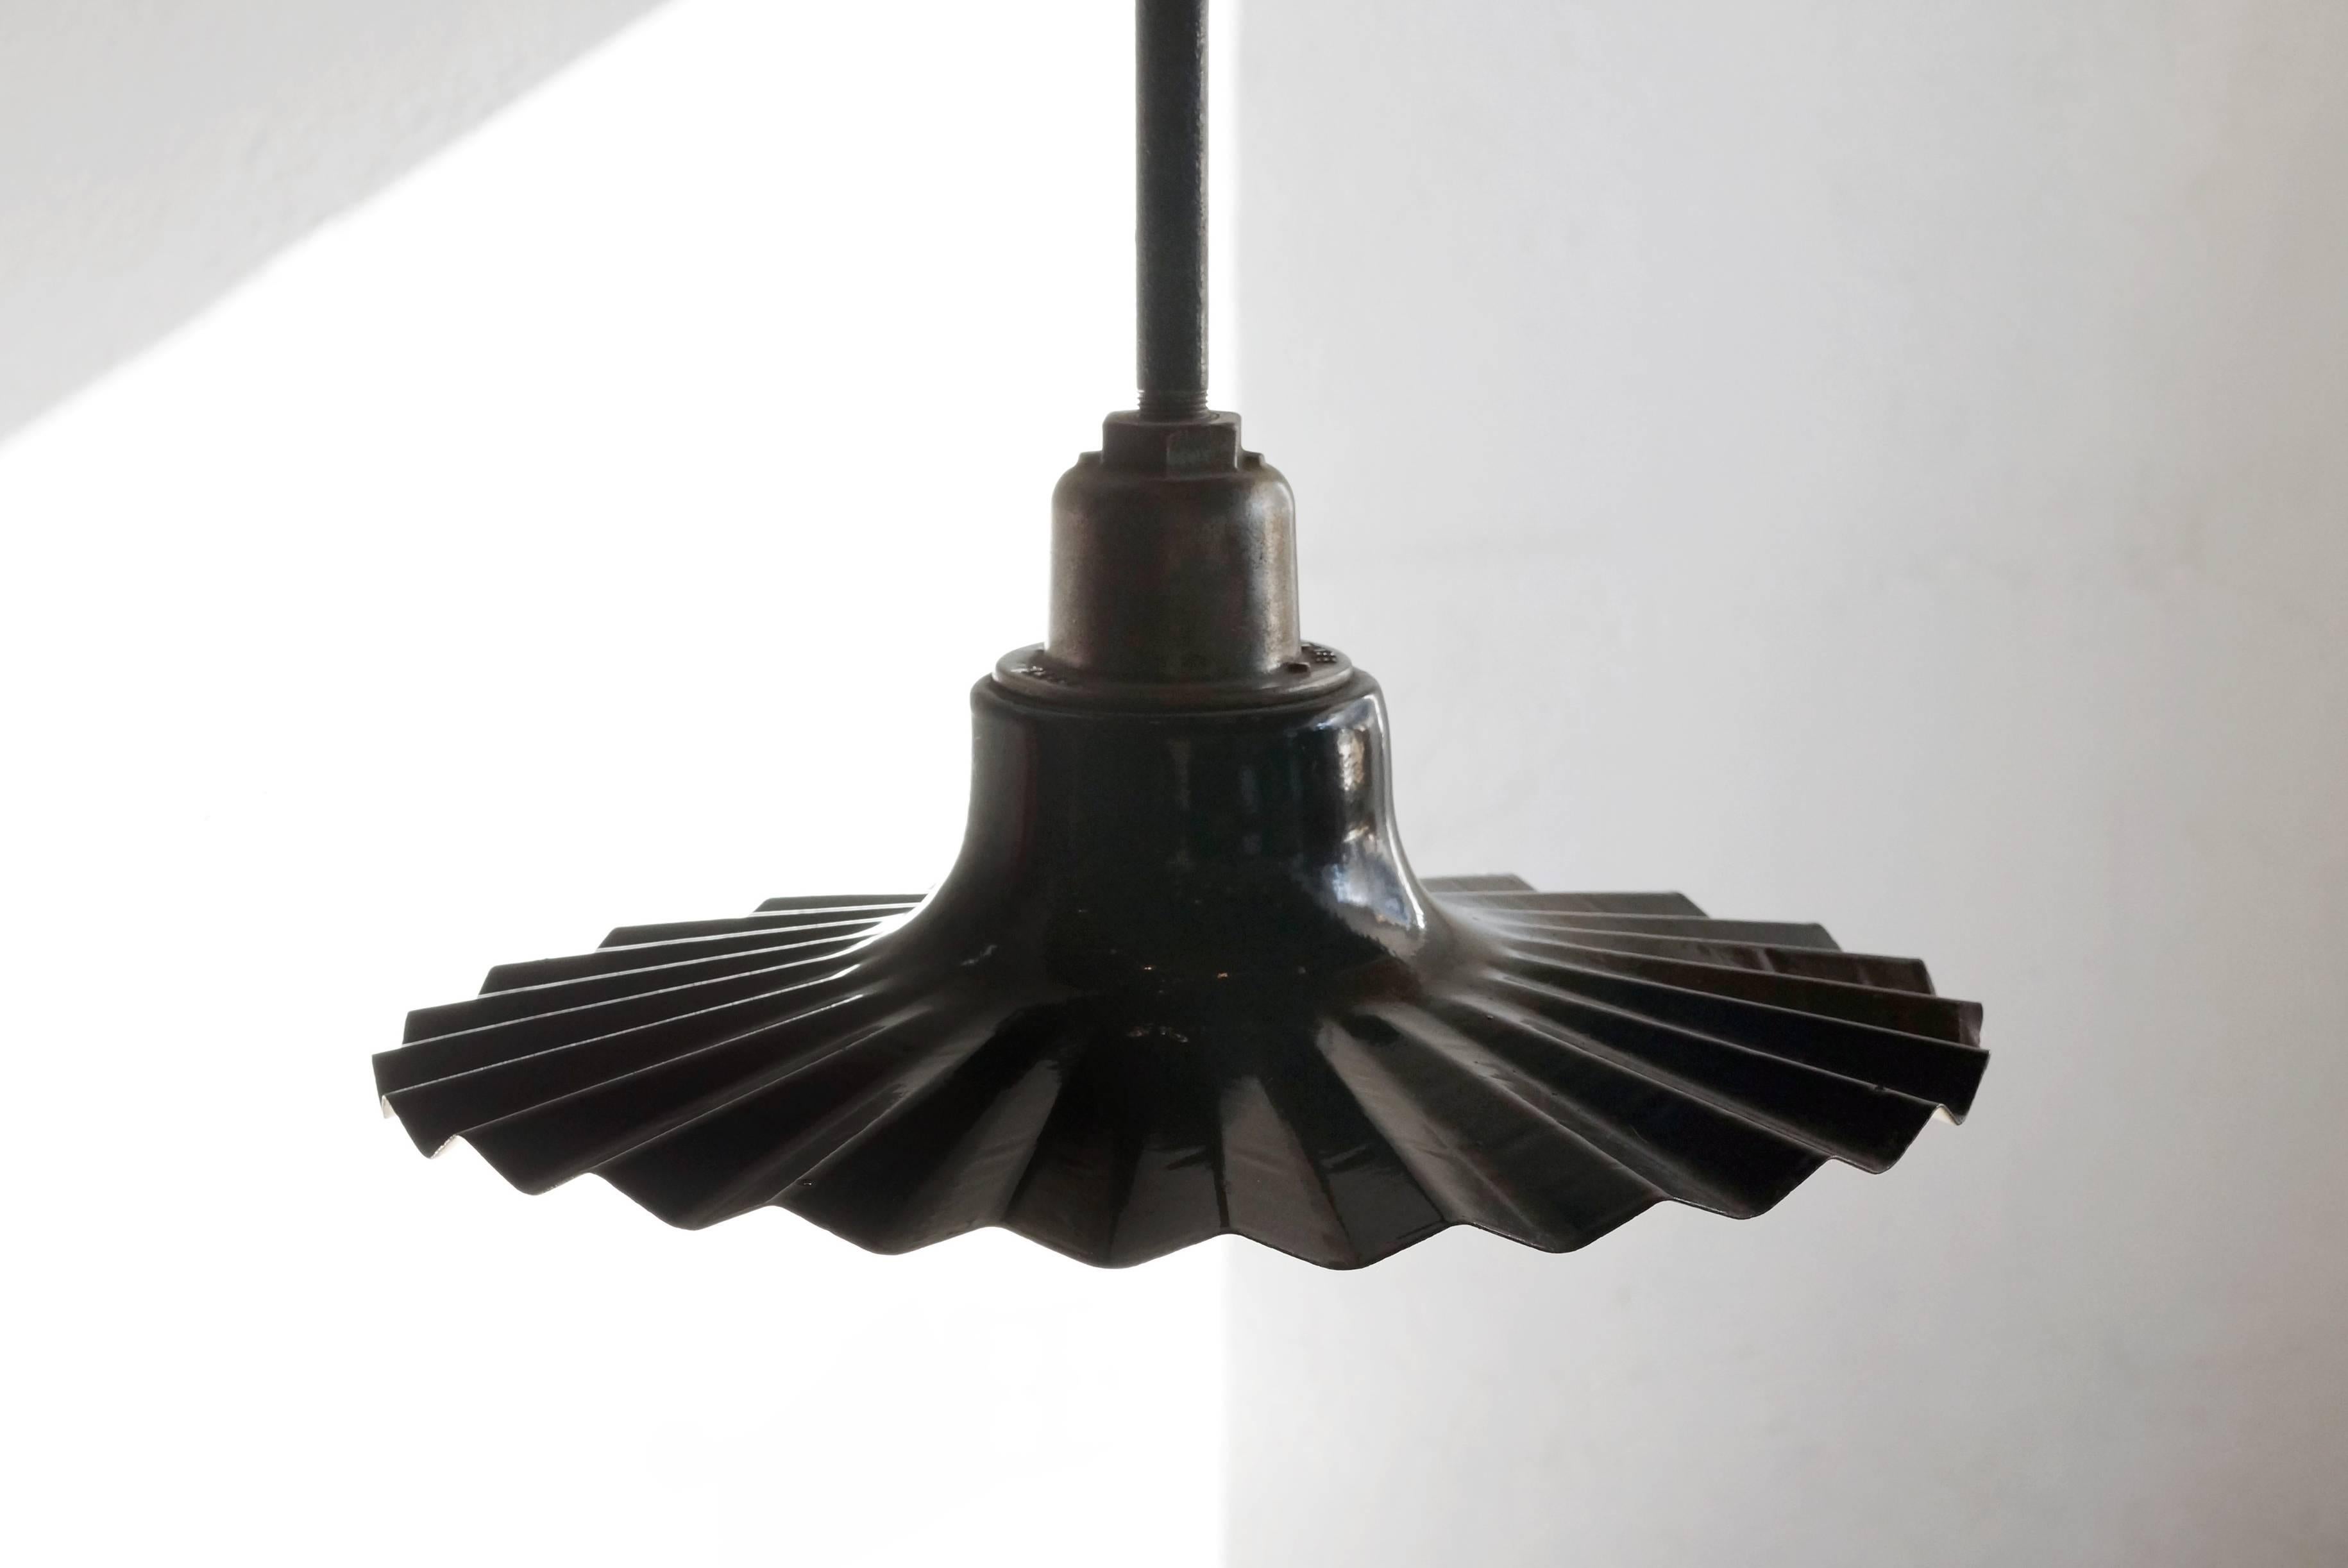 Porcelain hanging street light by Benjamin Electrical Co., Chicago, Ill, c. 1920s. This uncommon version is unique for its flat, radial wave shape. Features original ceiling cap. Fully-functional. Original porcelain finish is in very good condition,